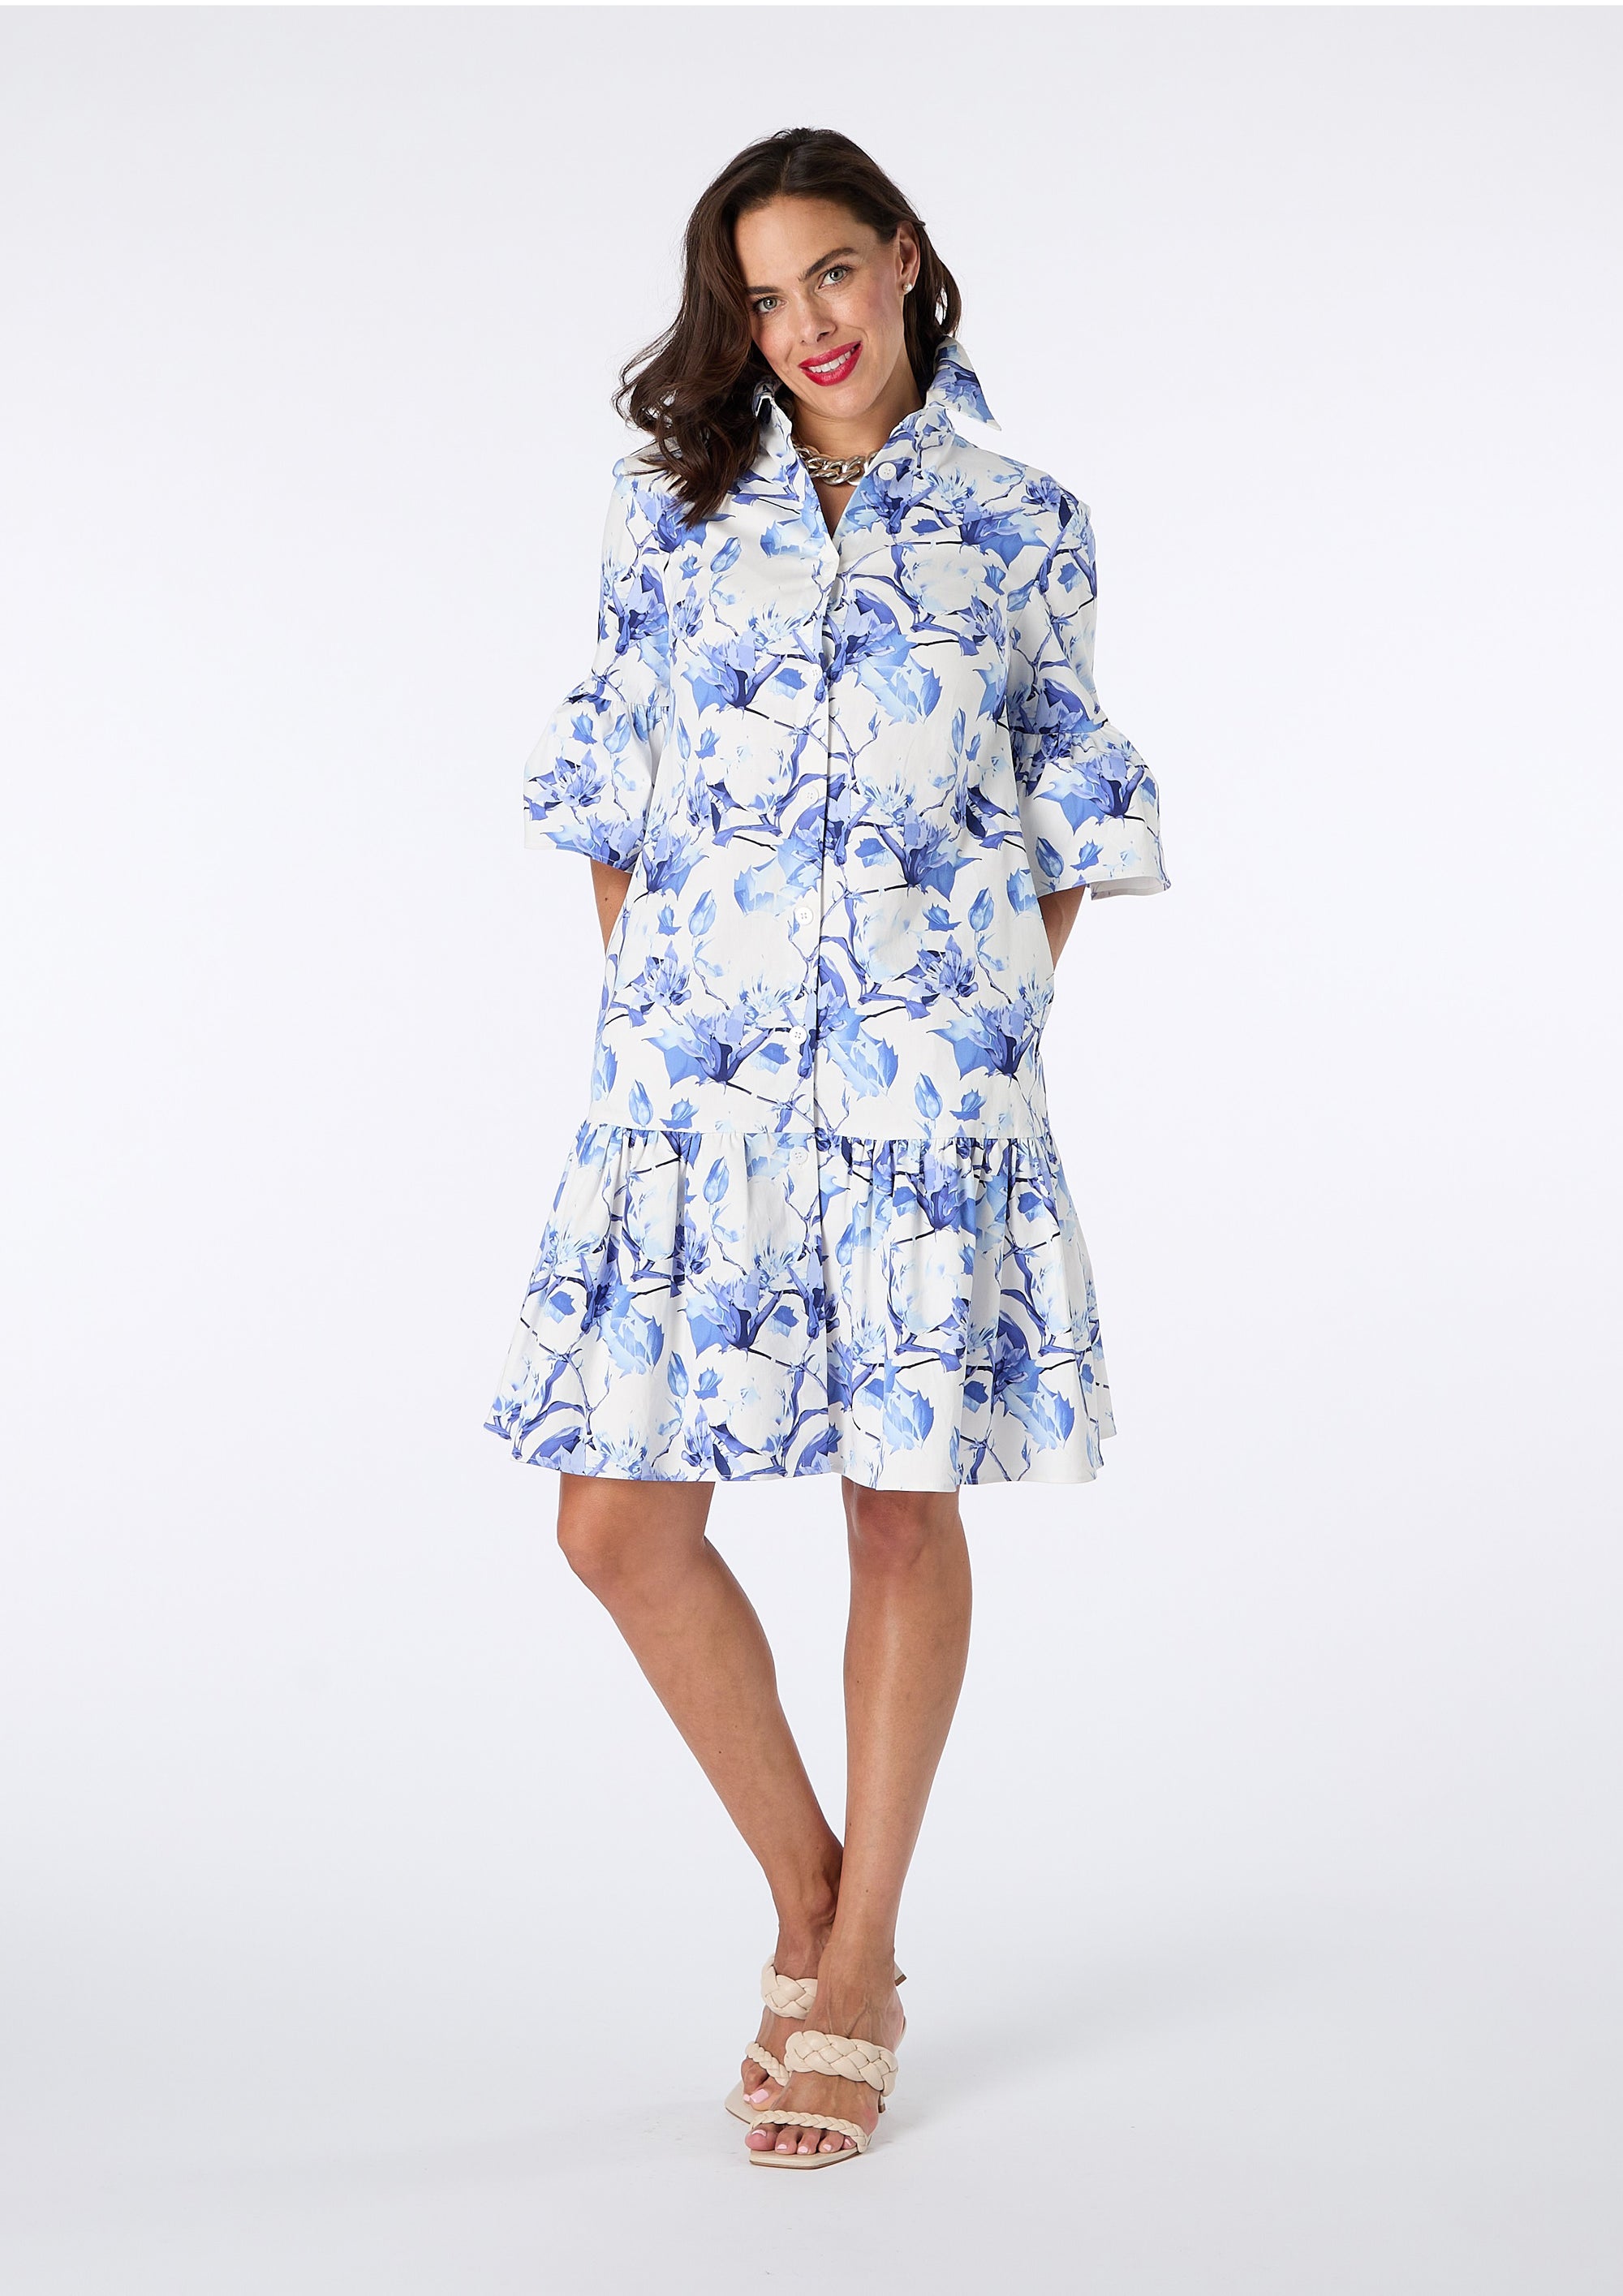 Alex Floral Frill Dress - Two Colourways Available